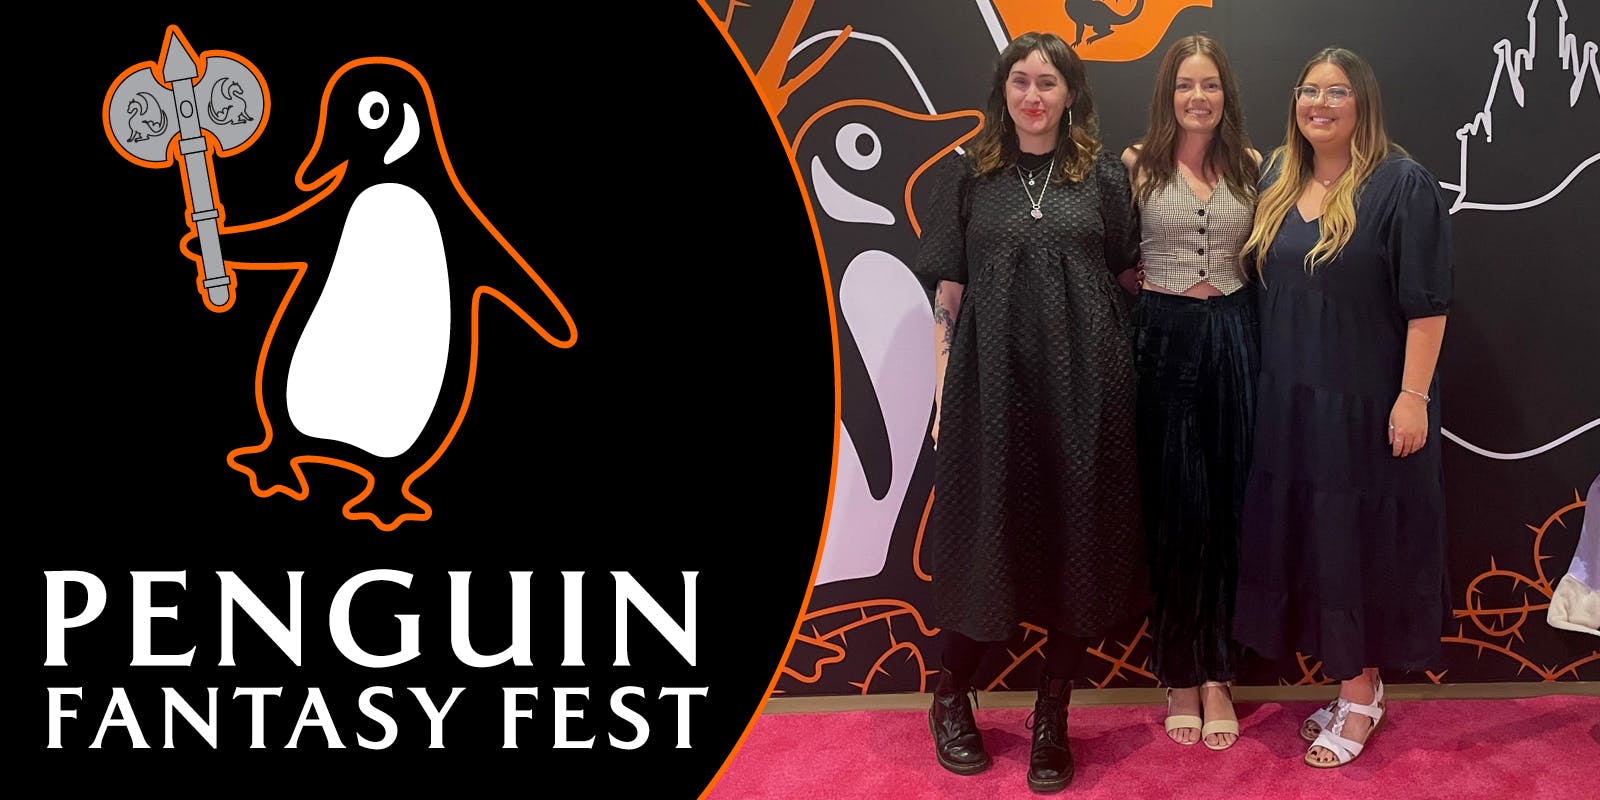 Penguin Fantasy Fest was a magical night for fantasy fans and authors